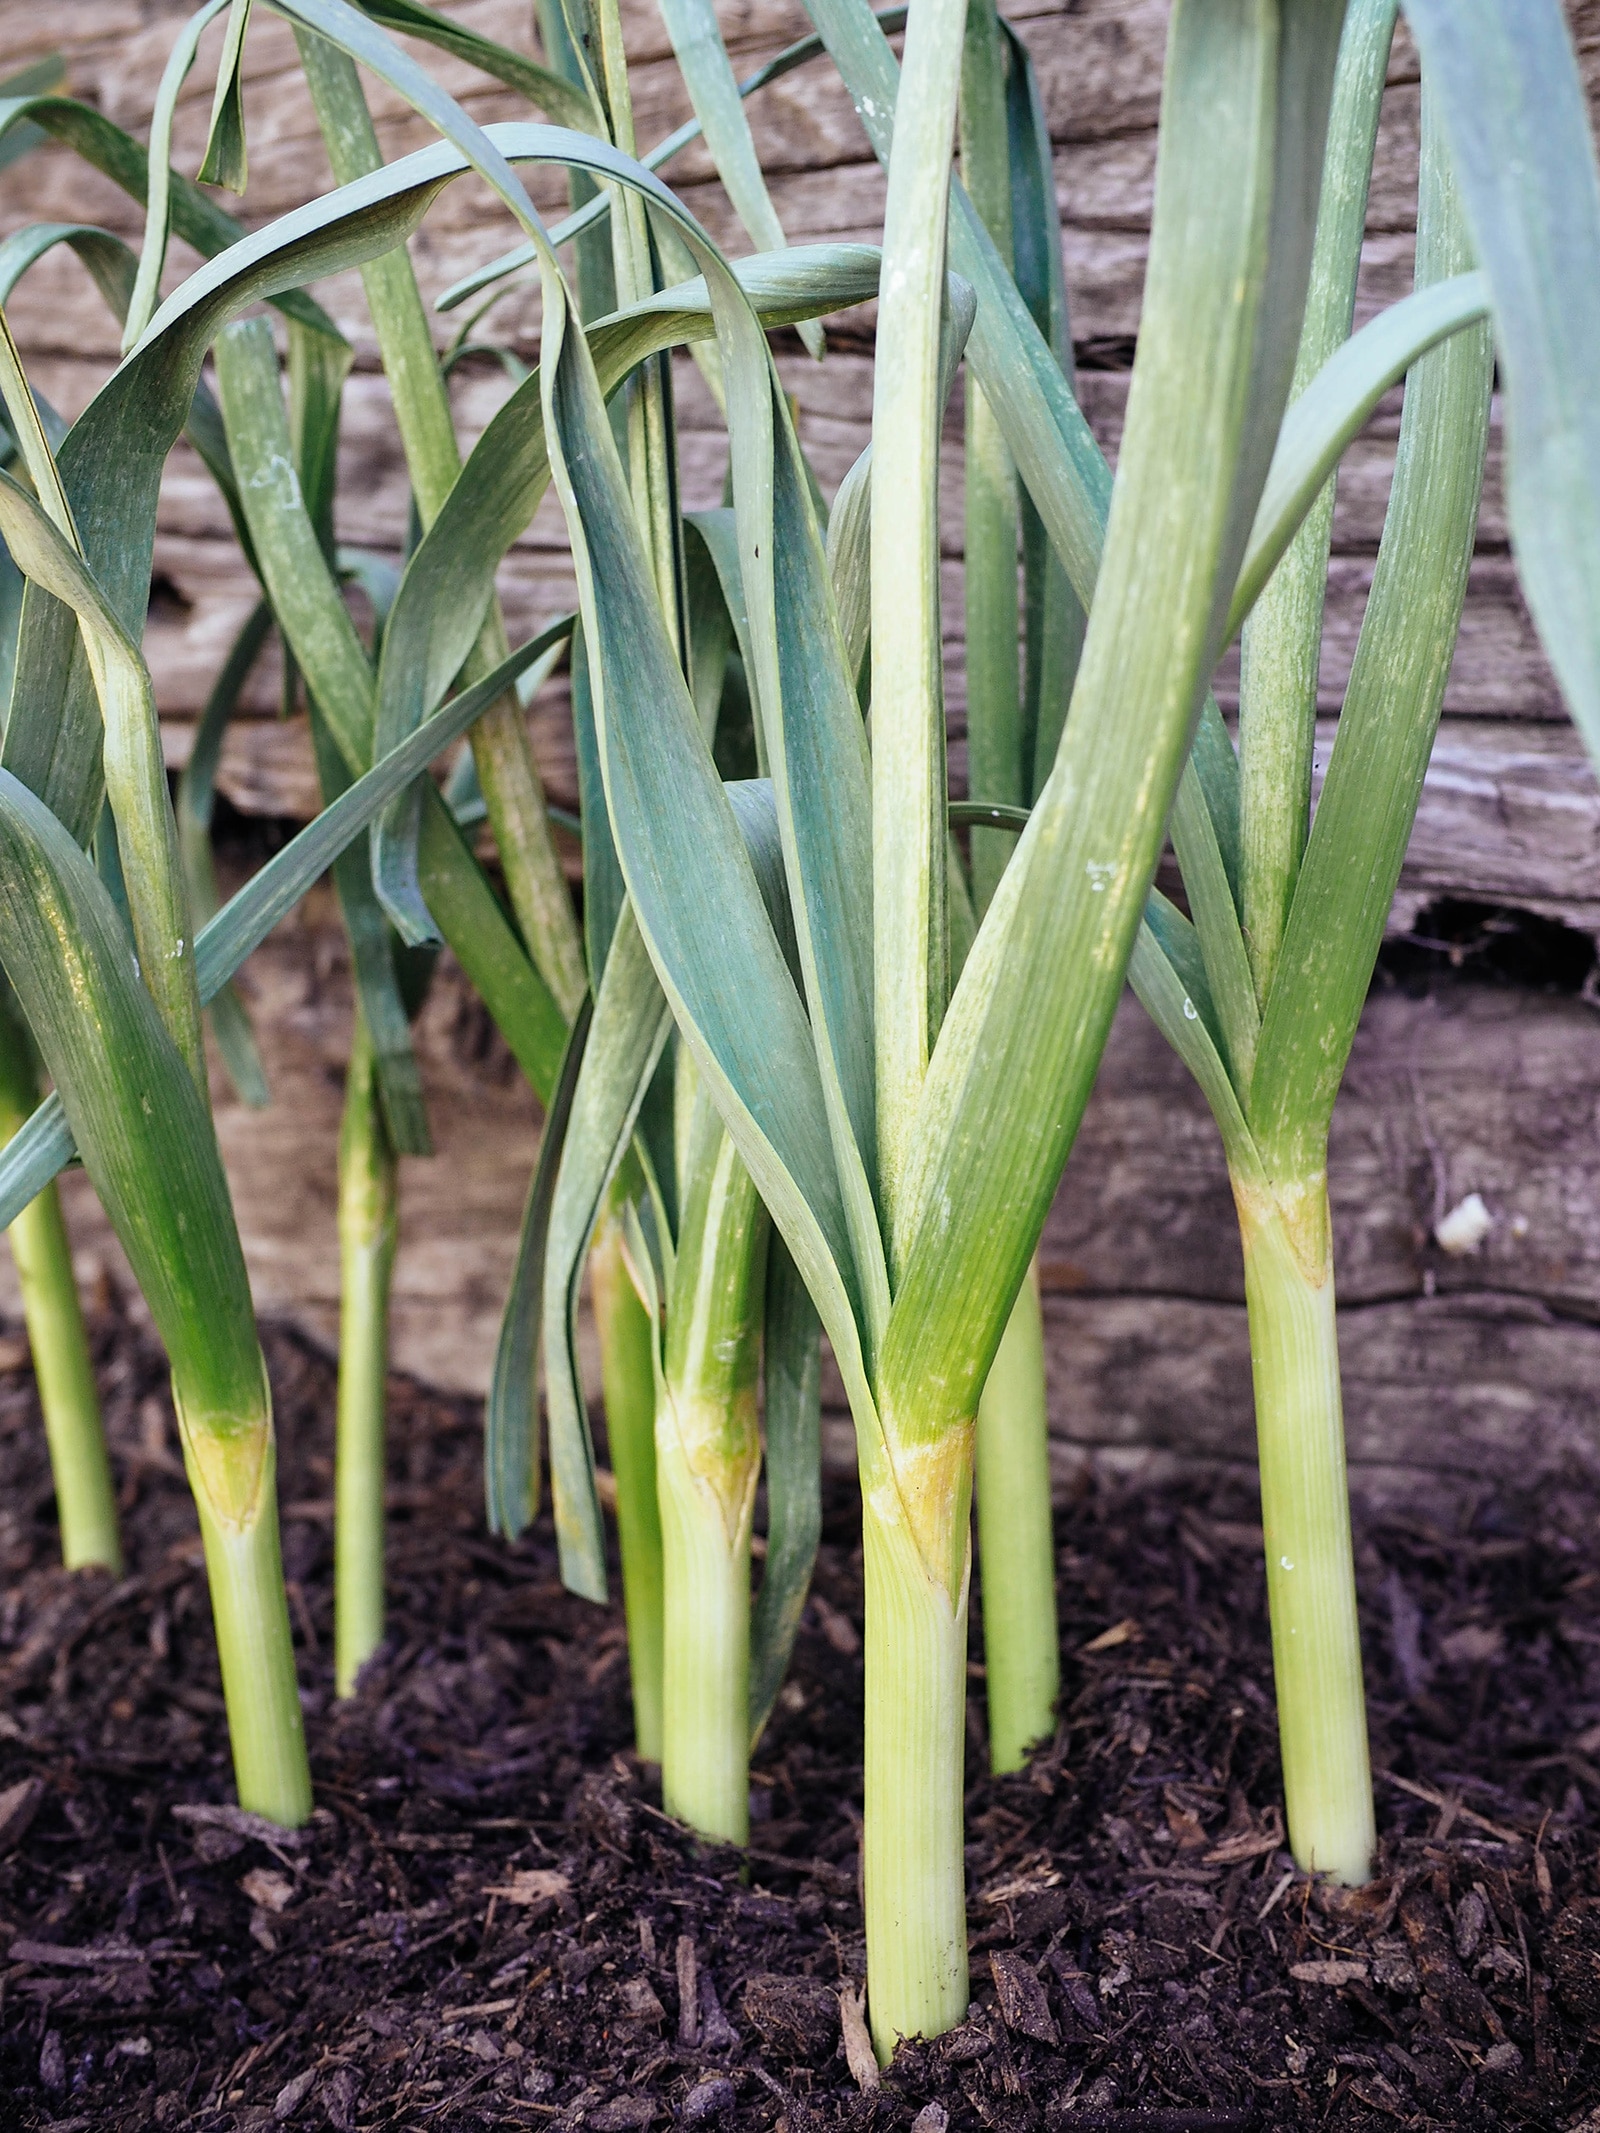 A crop of green garlic with tall, full leaves